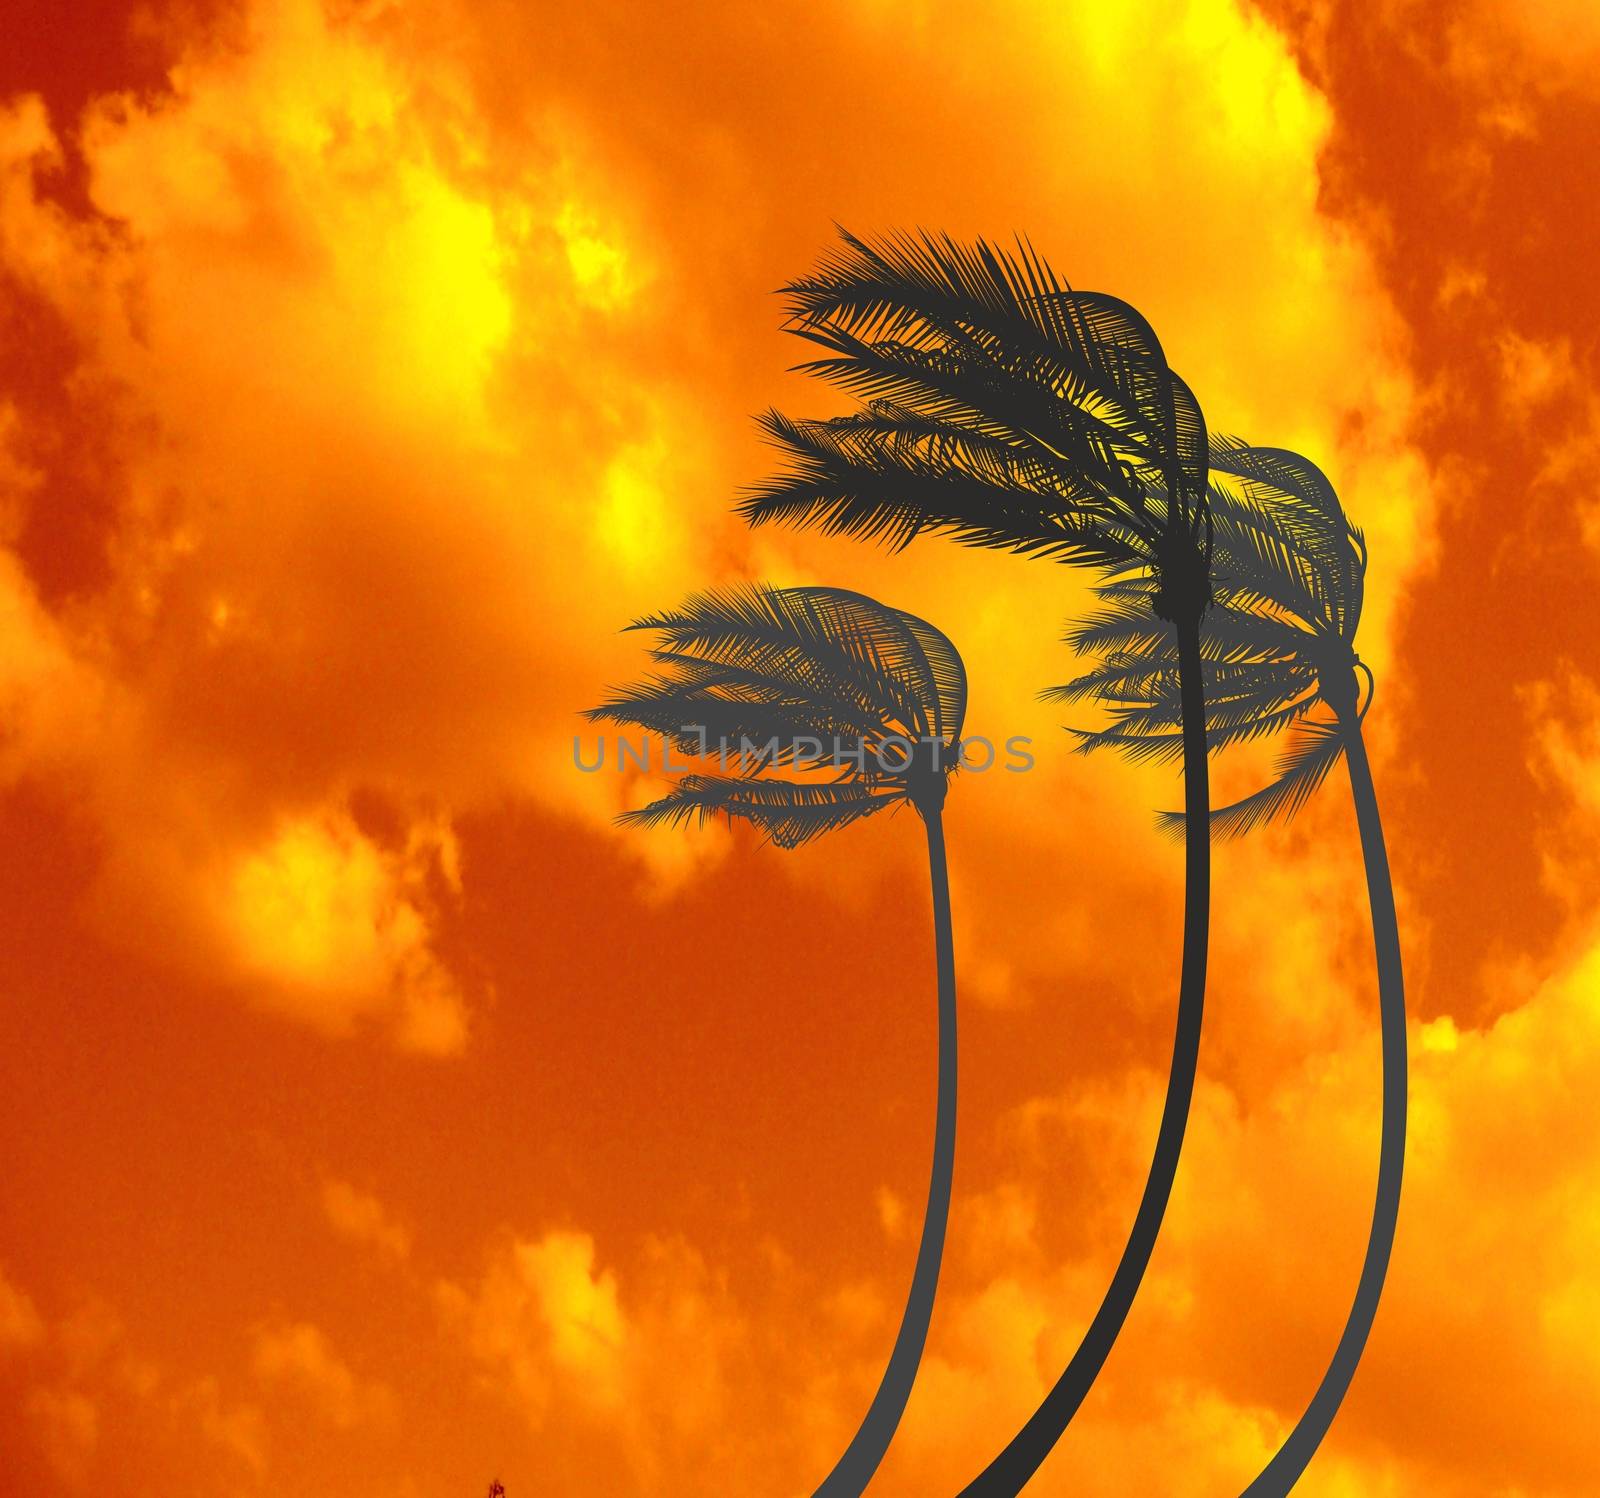 Palms in the Storm at Sunset by ard1